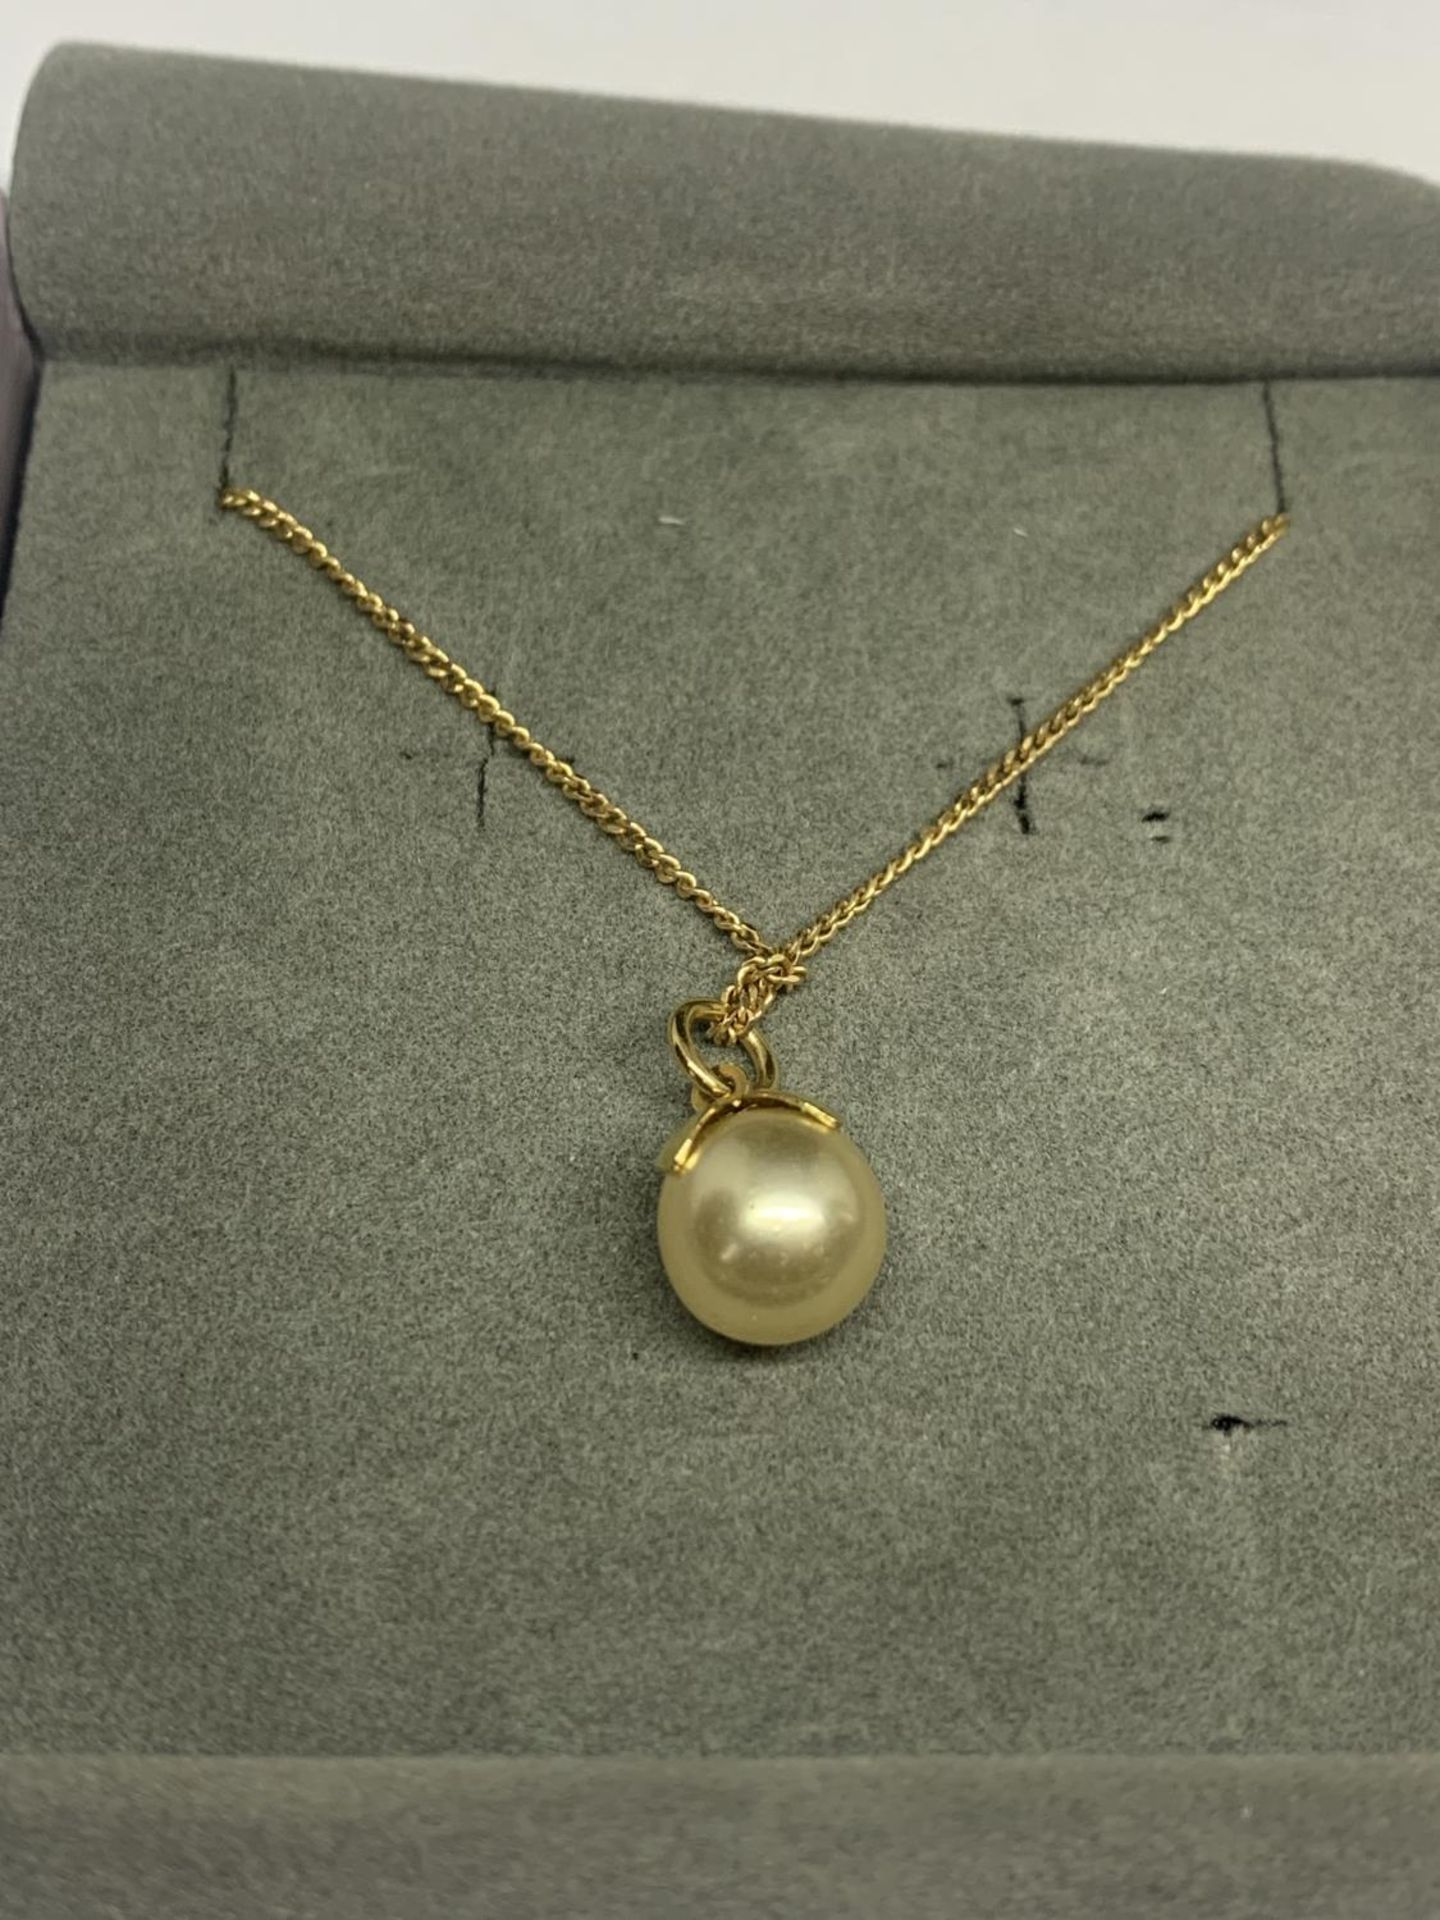 A 9 CARAT GOLD NECKLACE WITH A PEARL PENDANT IN A PRESENTATION BOX - Image 2 of 2